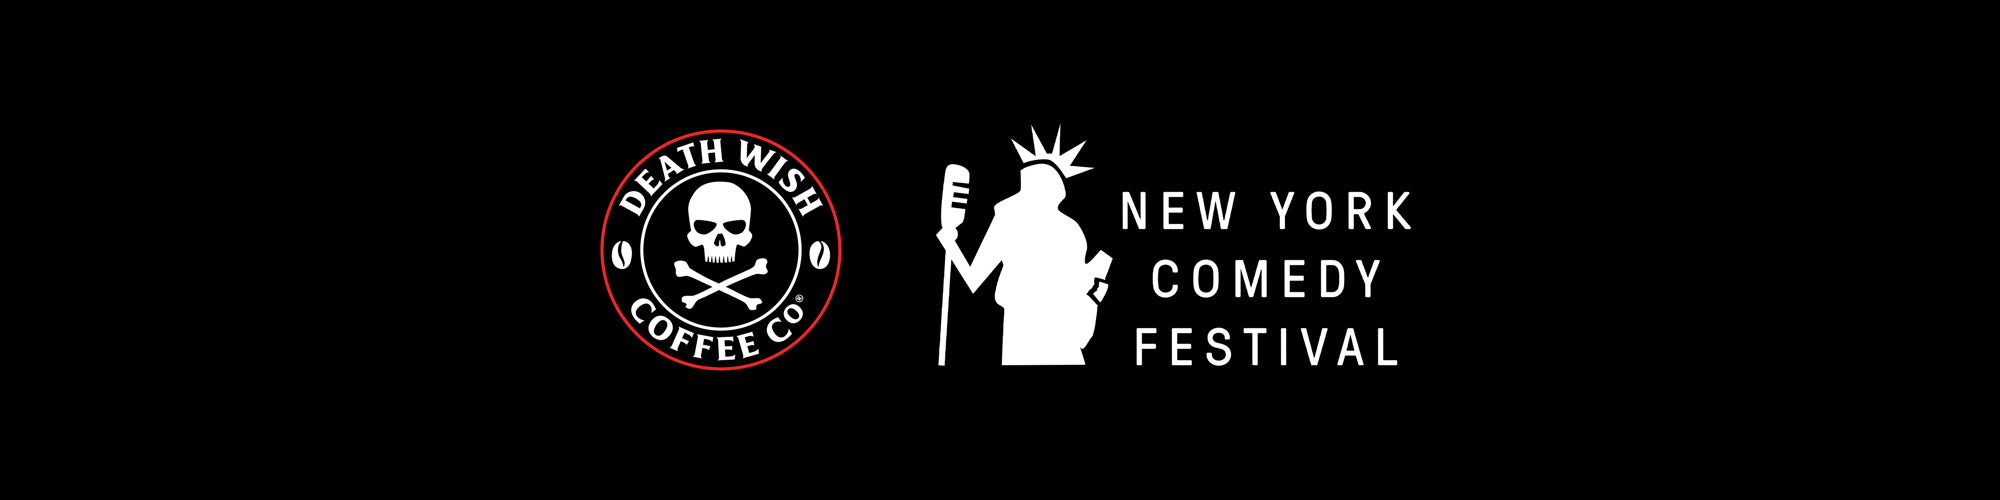 Death Wish Coffee is a proud sponsor of the New York Comedy Festival